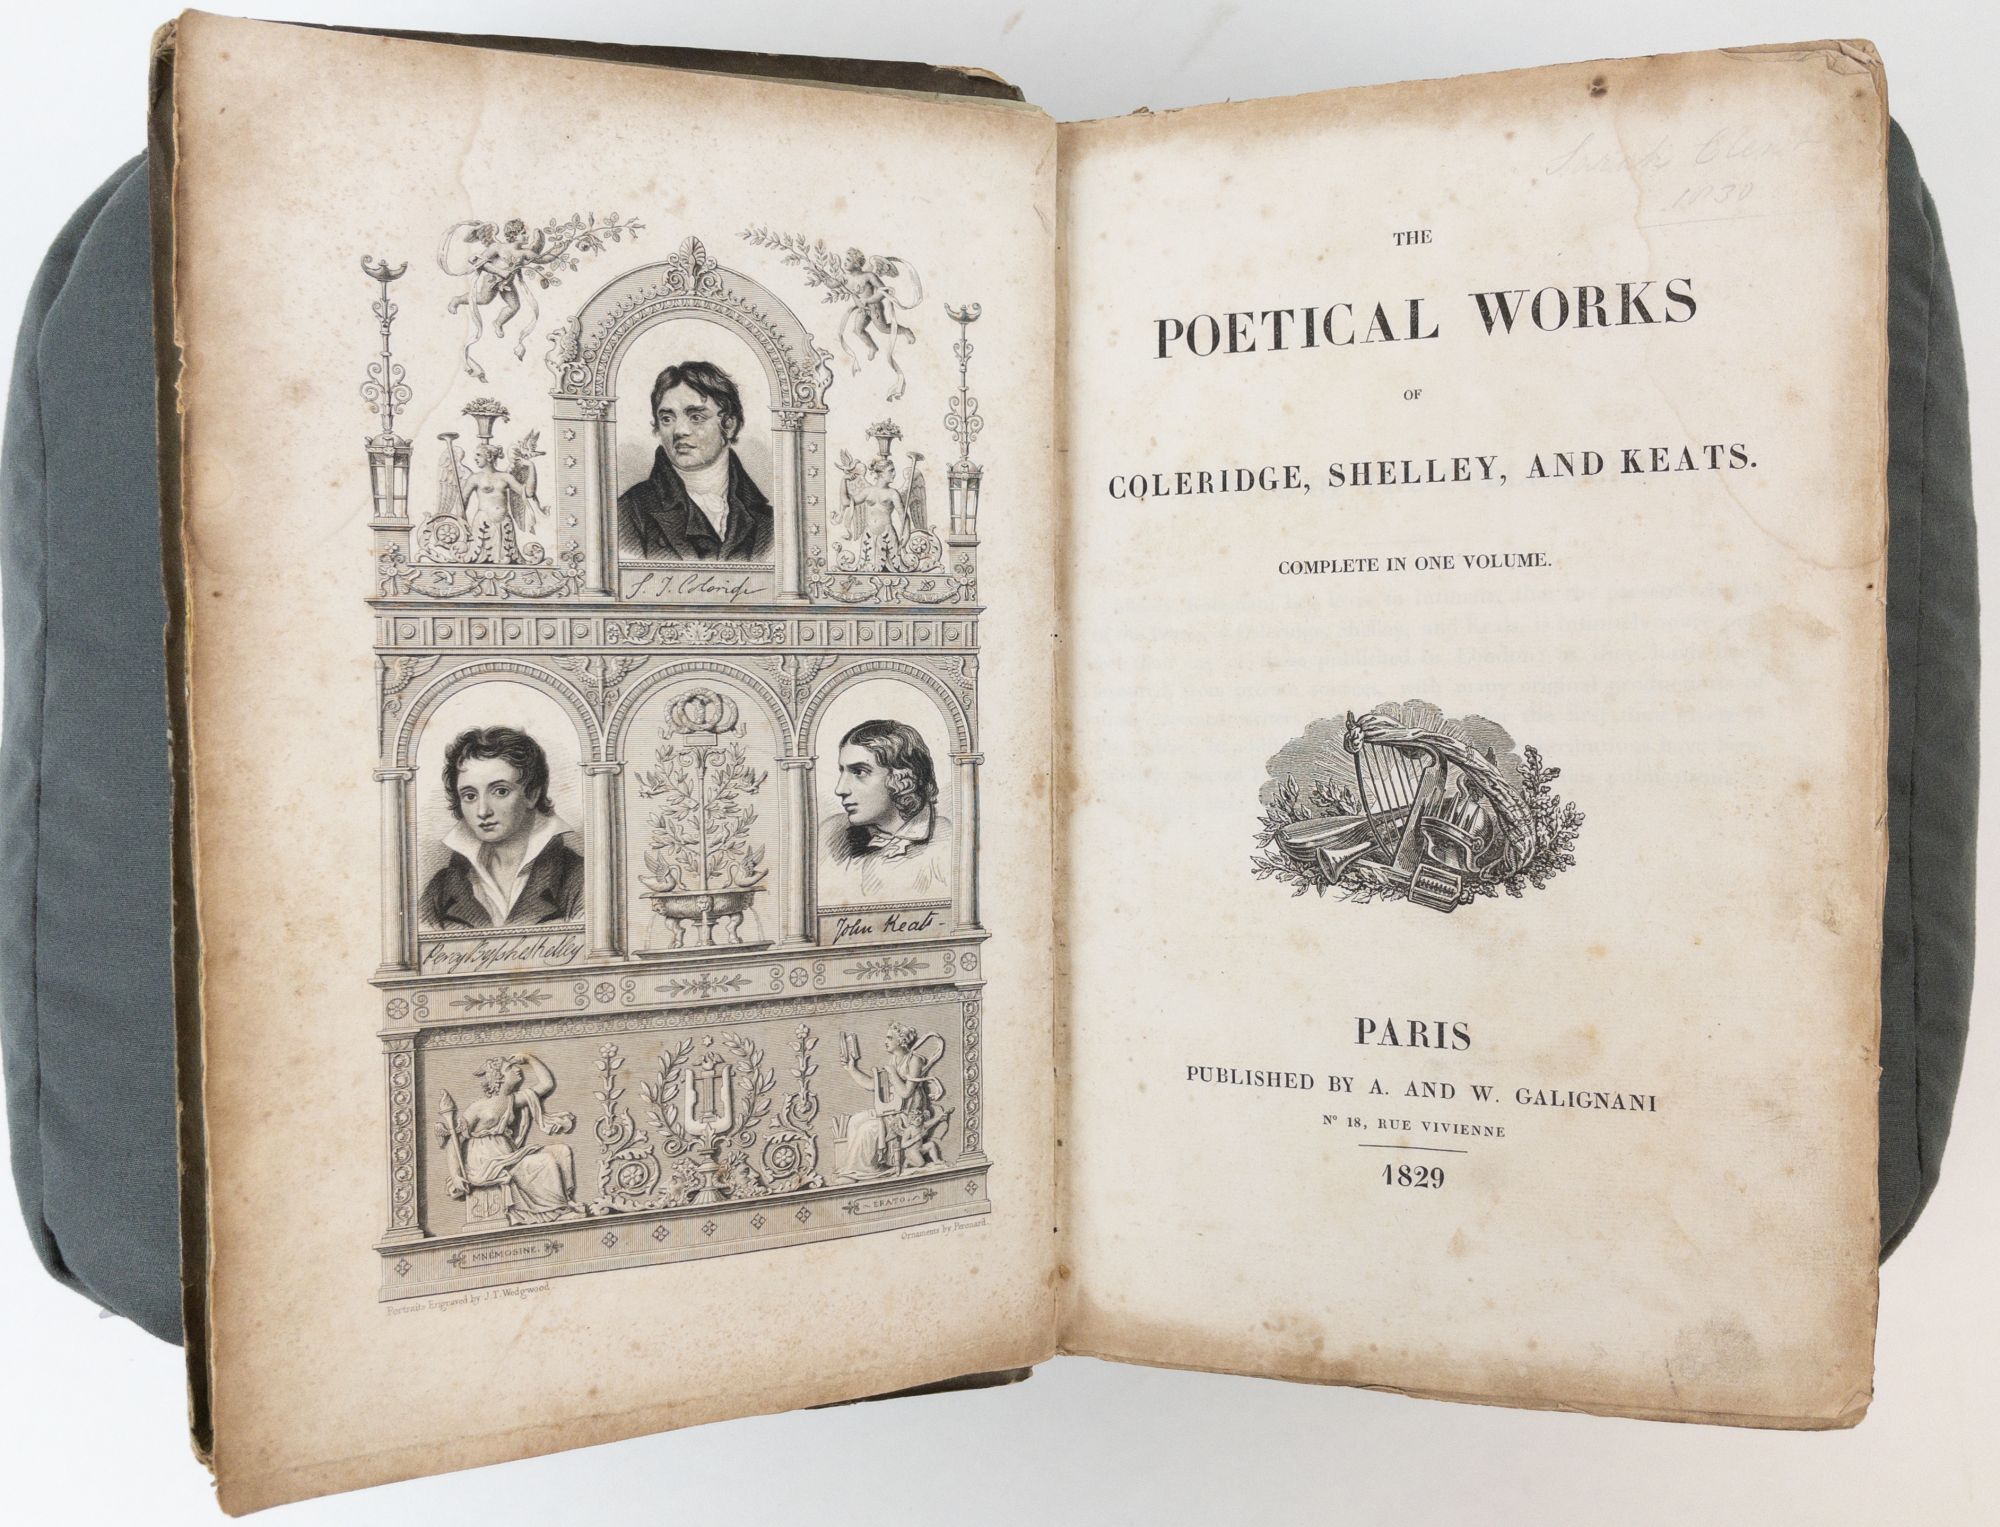 Product Image for THE POETICAL WORKS OF COLERIDGE, SHELLEY, AND KEATS. COMPLETE IN ONE VOLUME